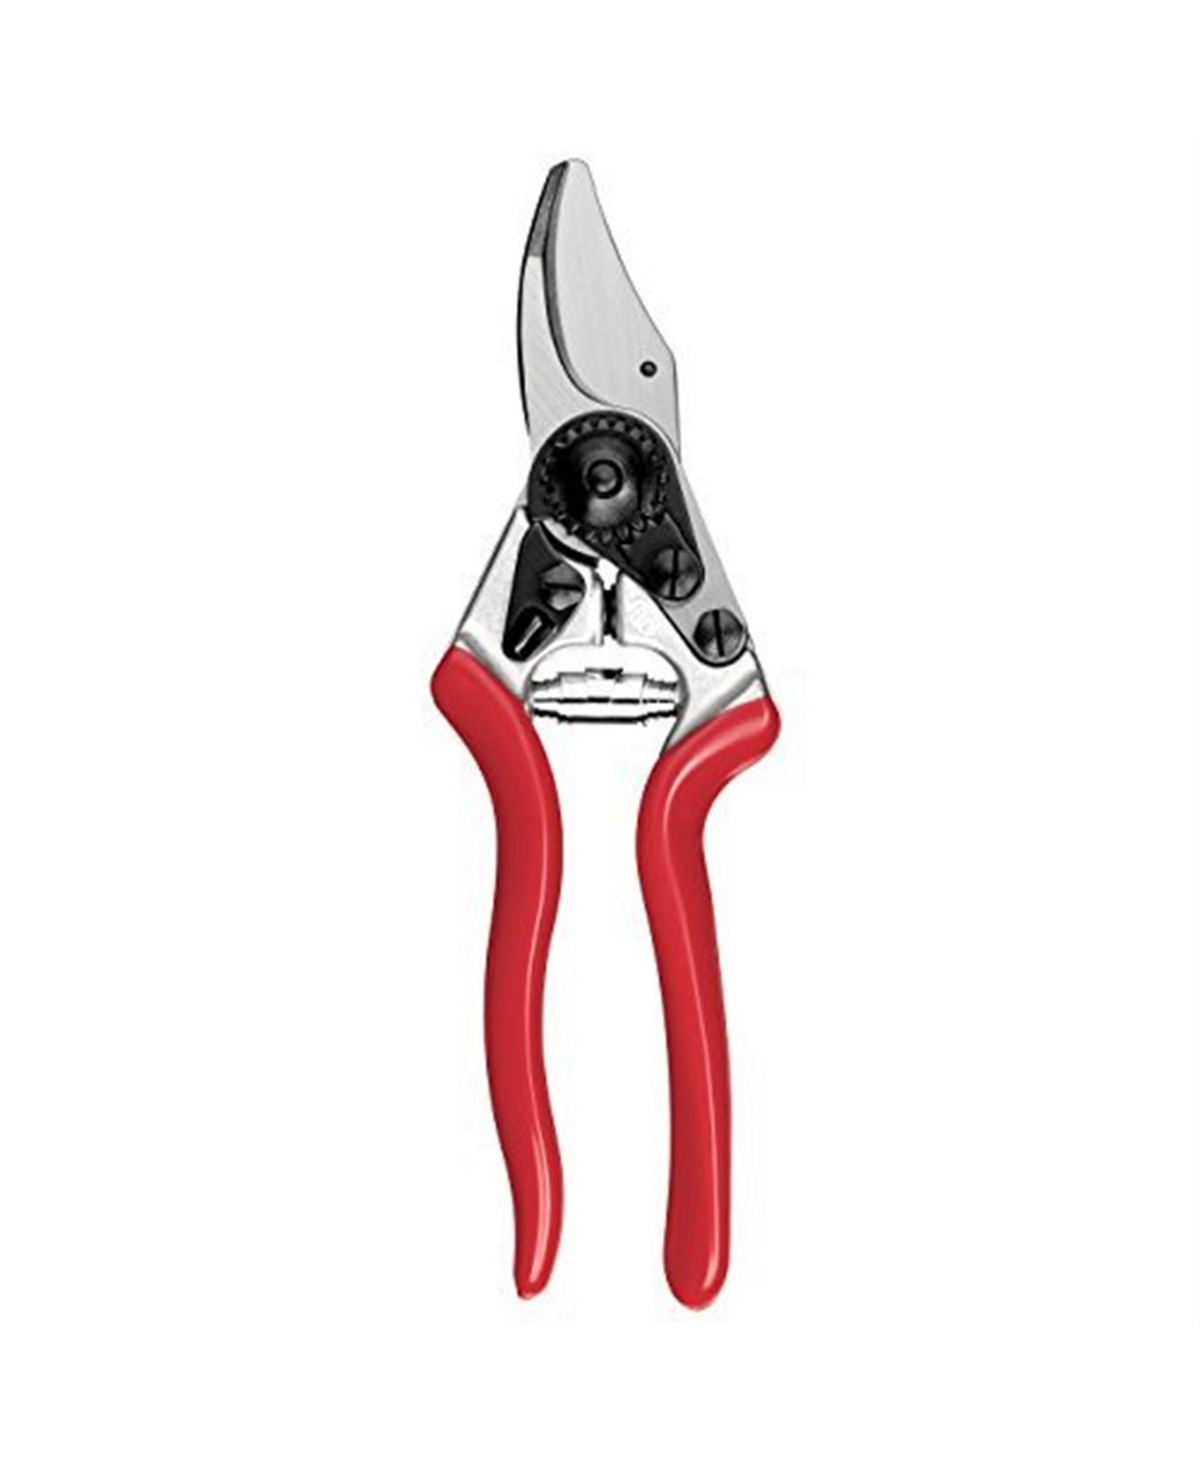 F-6 High Performance One-Hand Garden Pruning Shears - Red